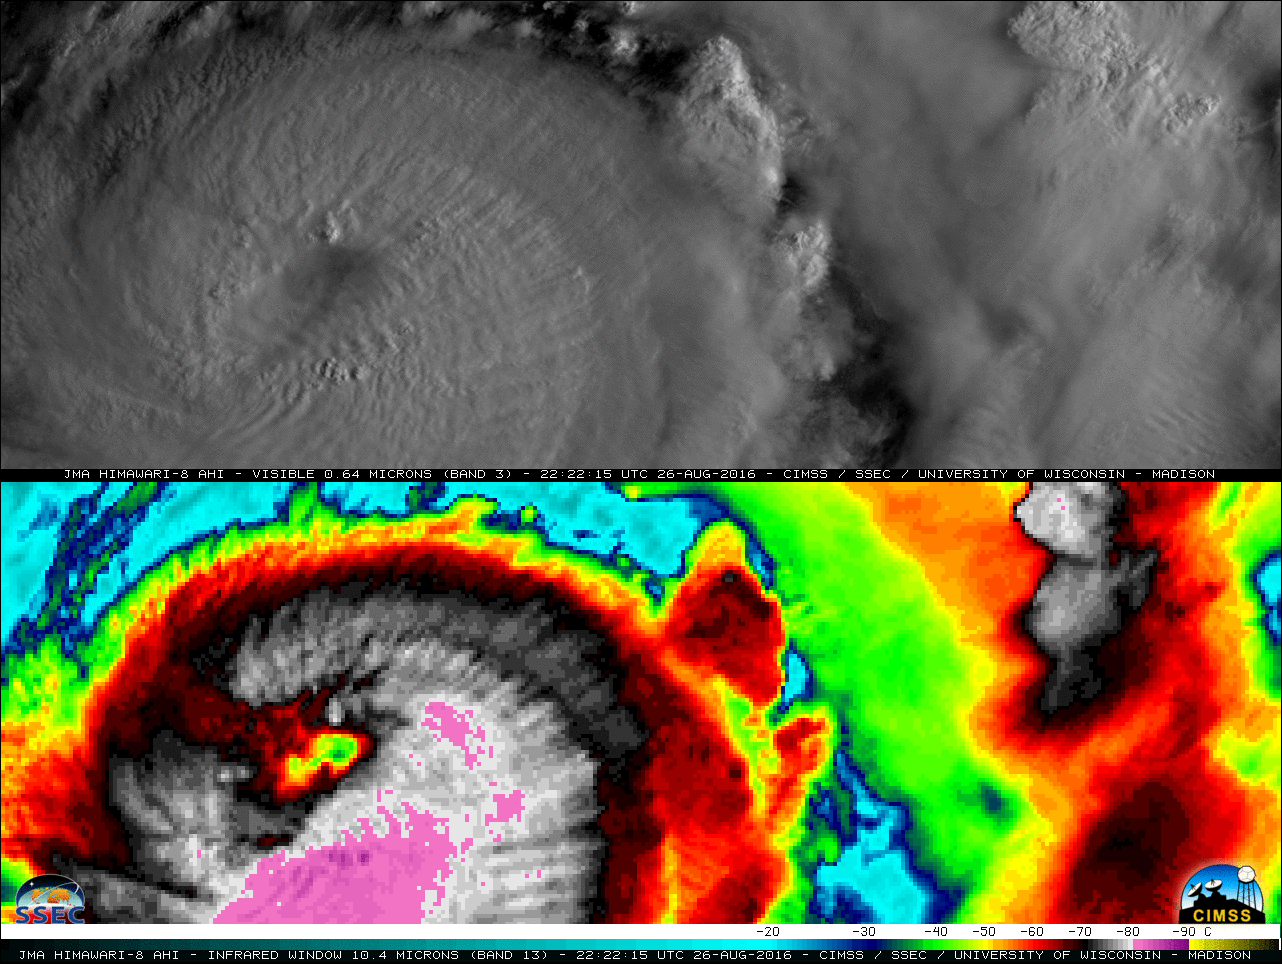 Himawari-8 0.64 µm Visible (top) and 10.4 µm Infrared Window (bottom) images [click to play MP4 animation]